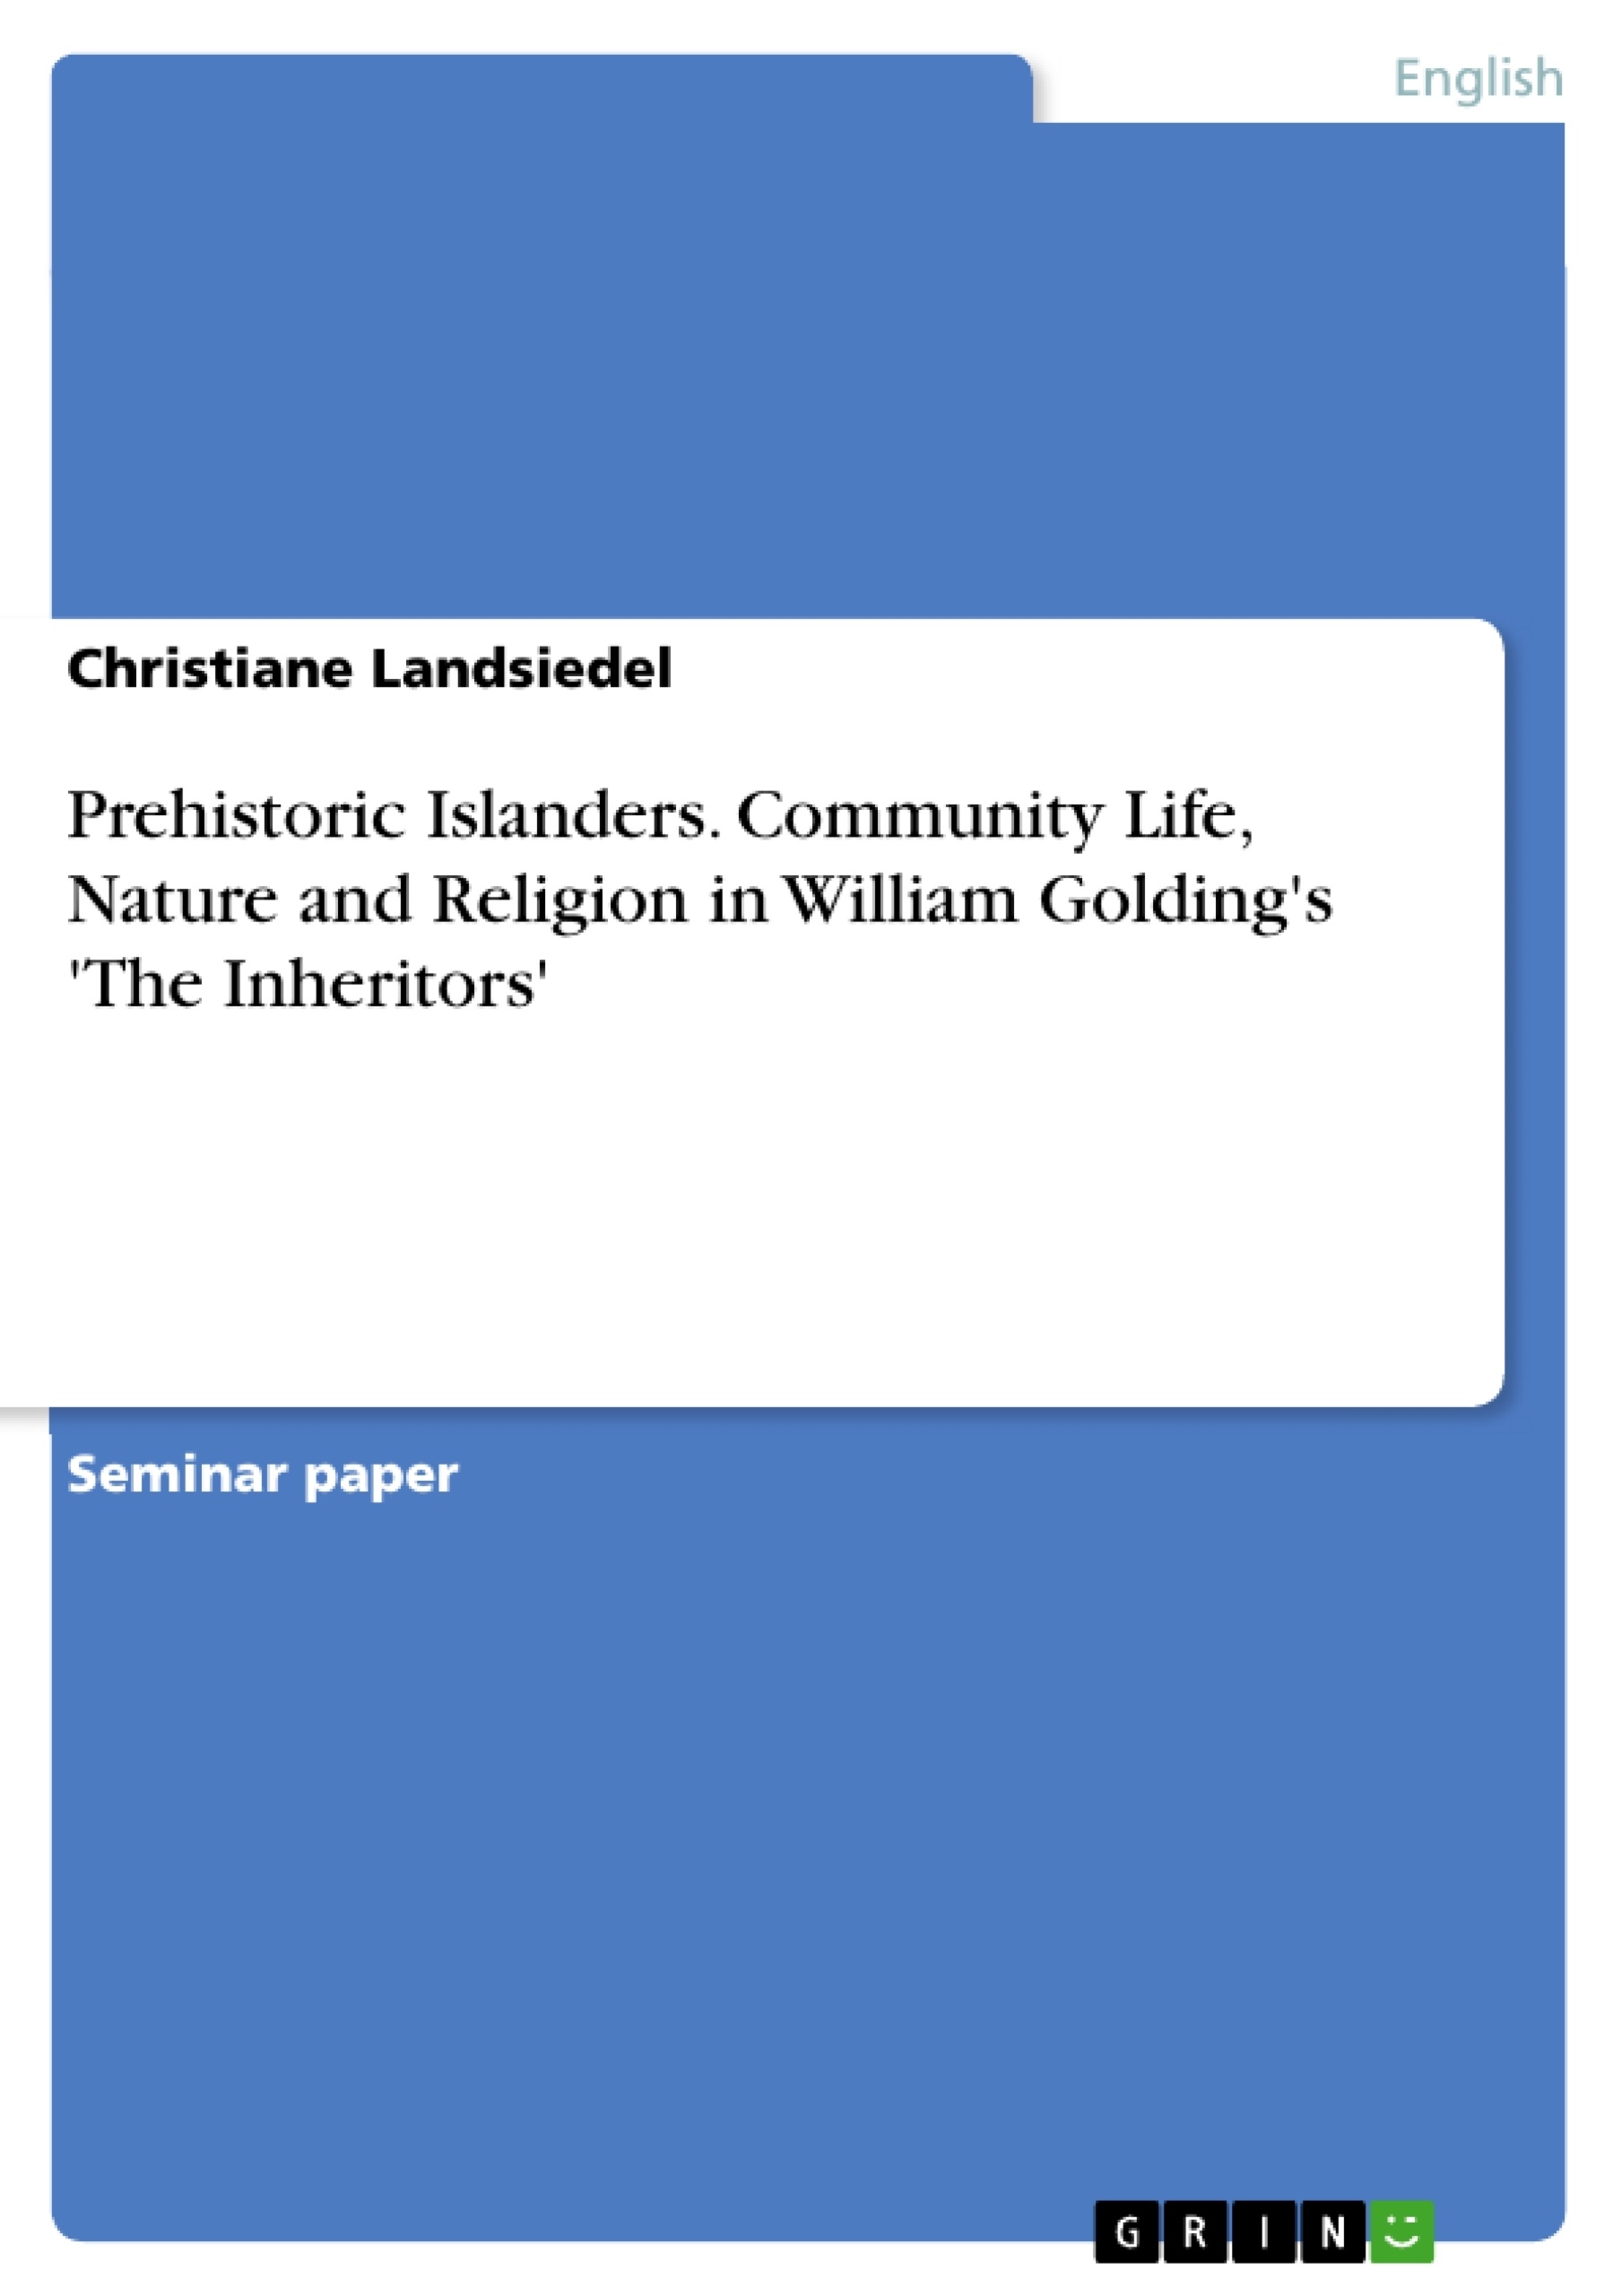 Title: Prehistoric Islanders. Community Life, Nature and Religion in William Golding's 'The Inheritors'